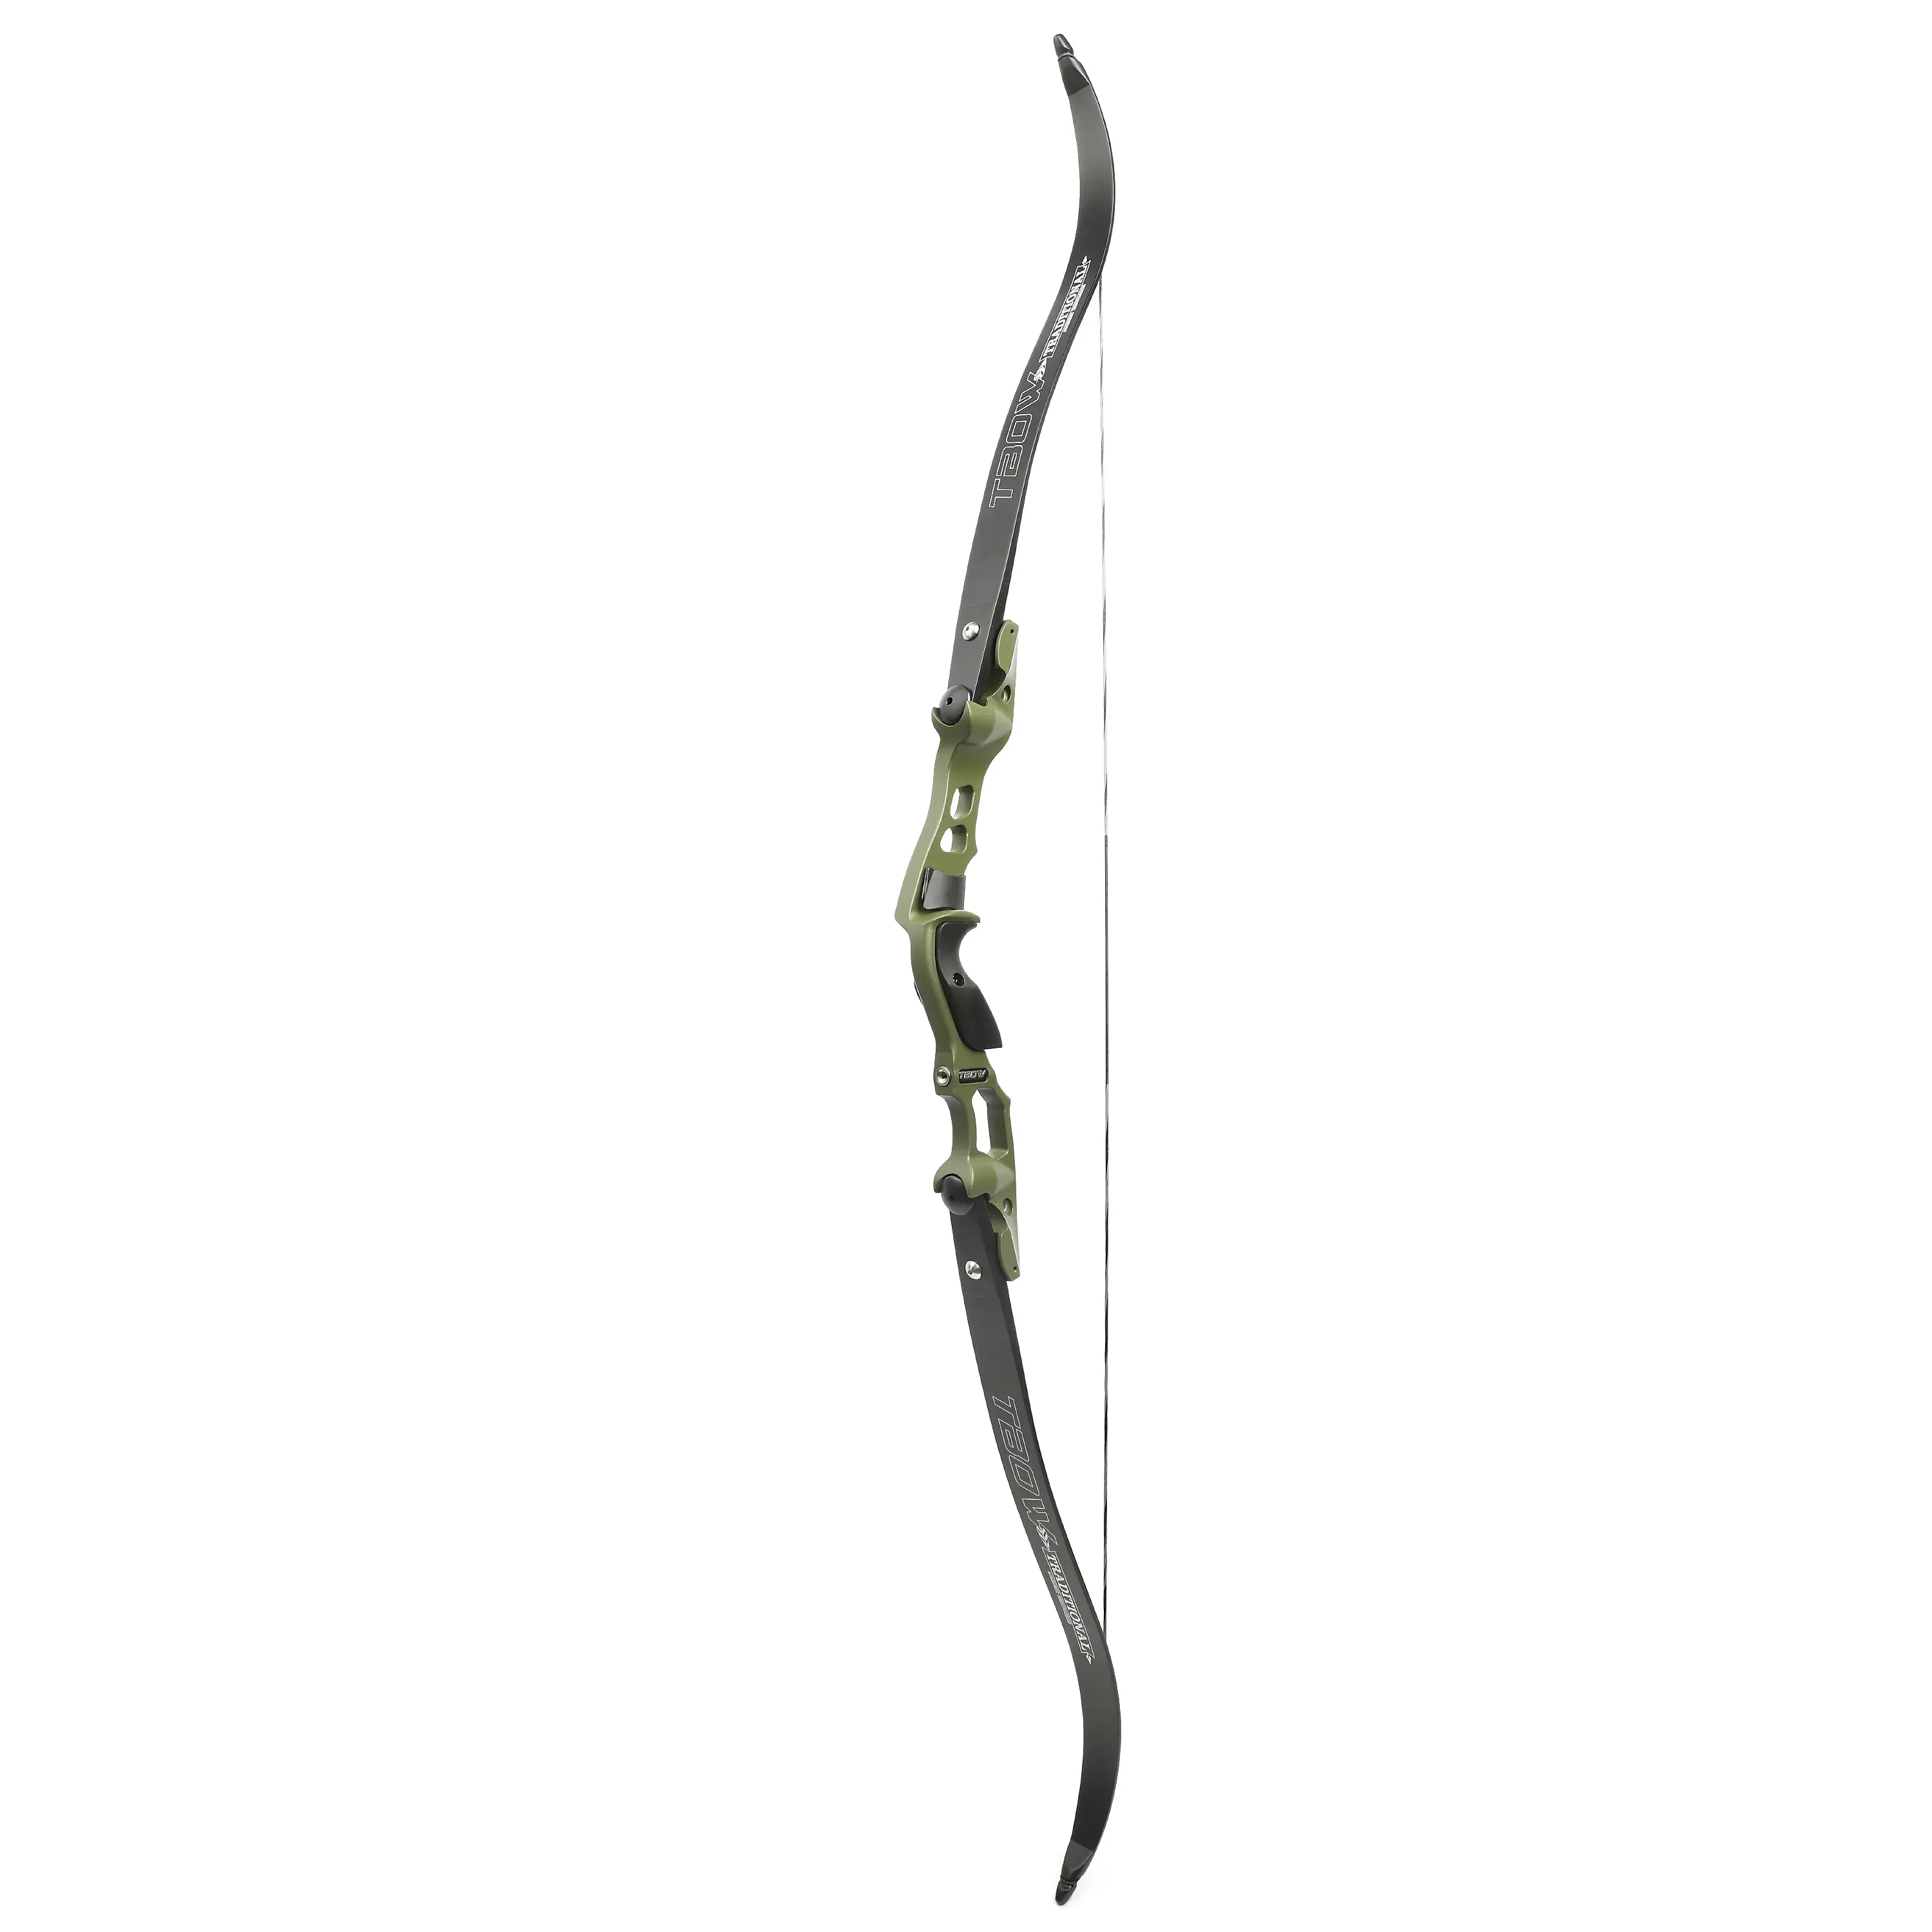 TBOW 62 ILF Traditional Hunting Recurve Bow 25-60 lbs